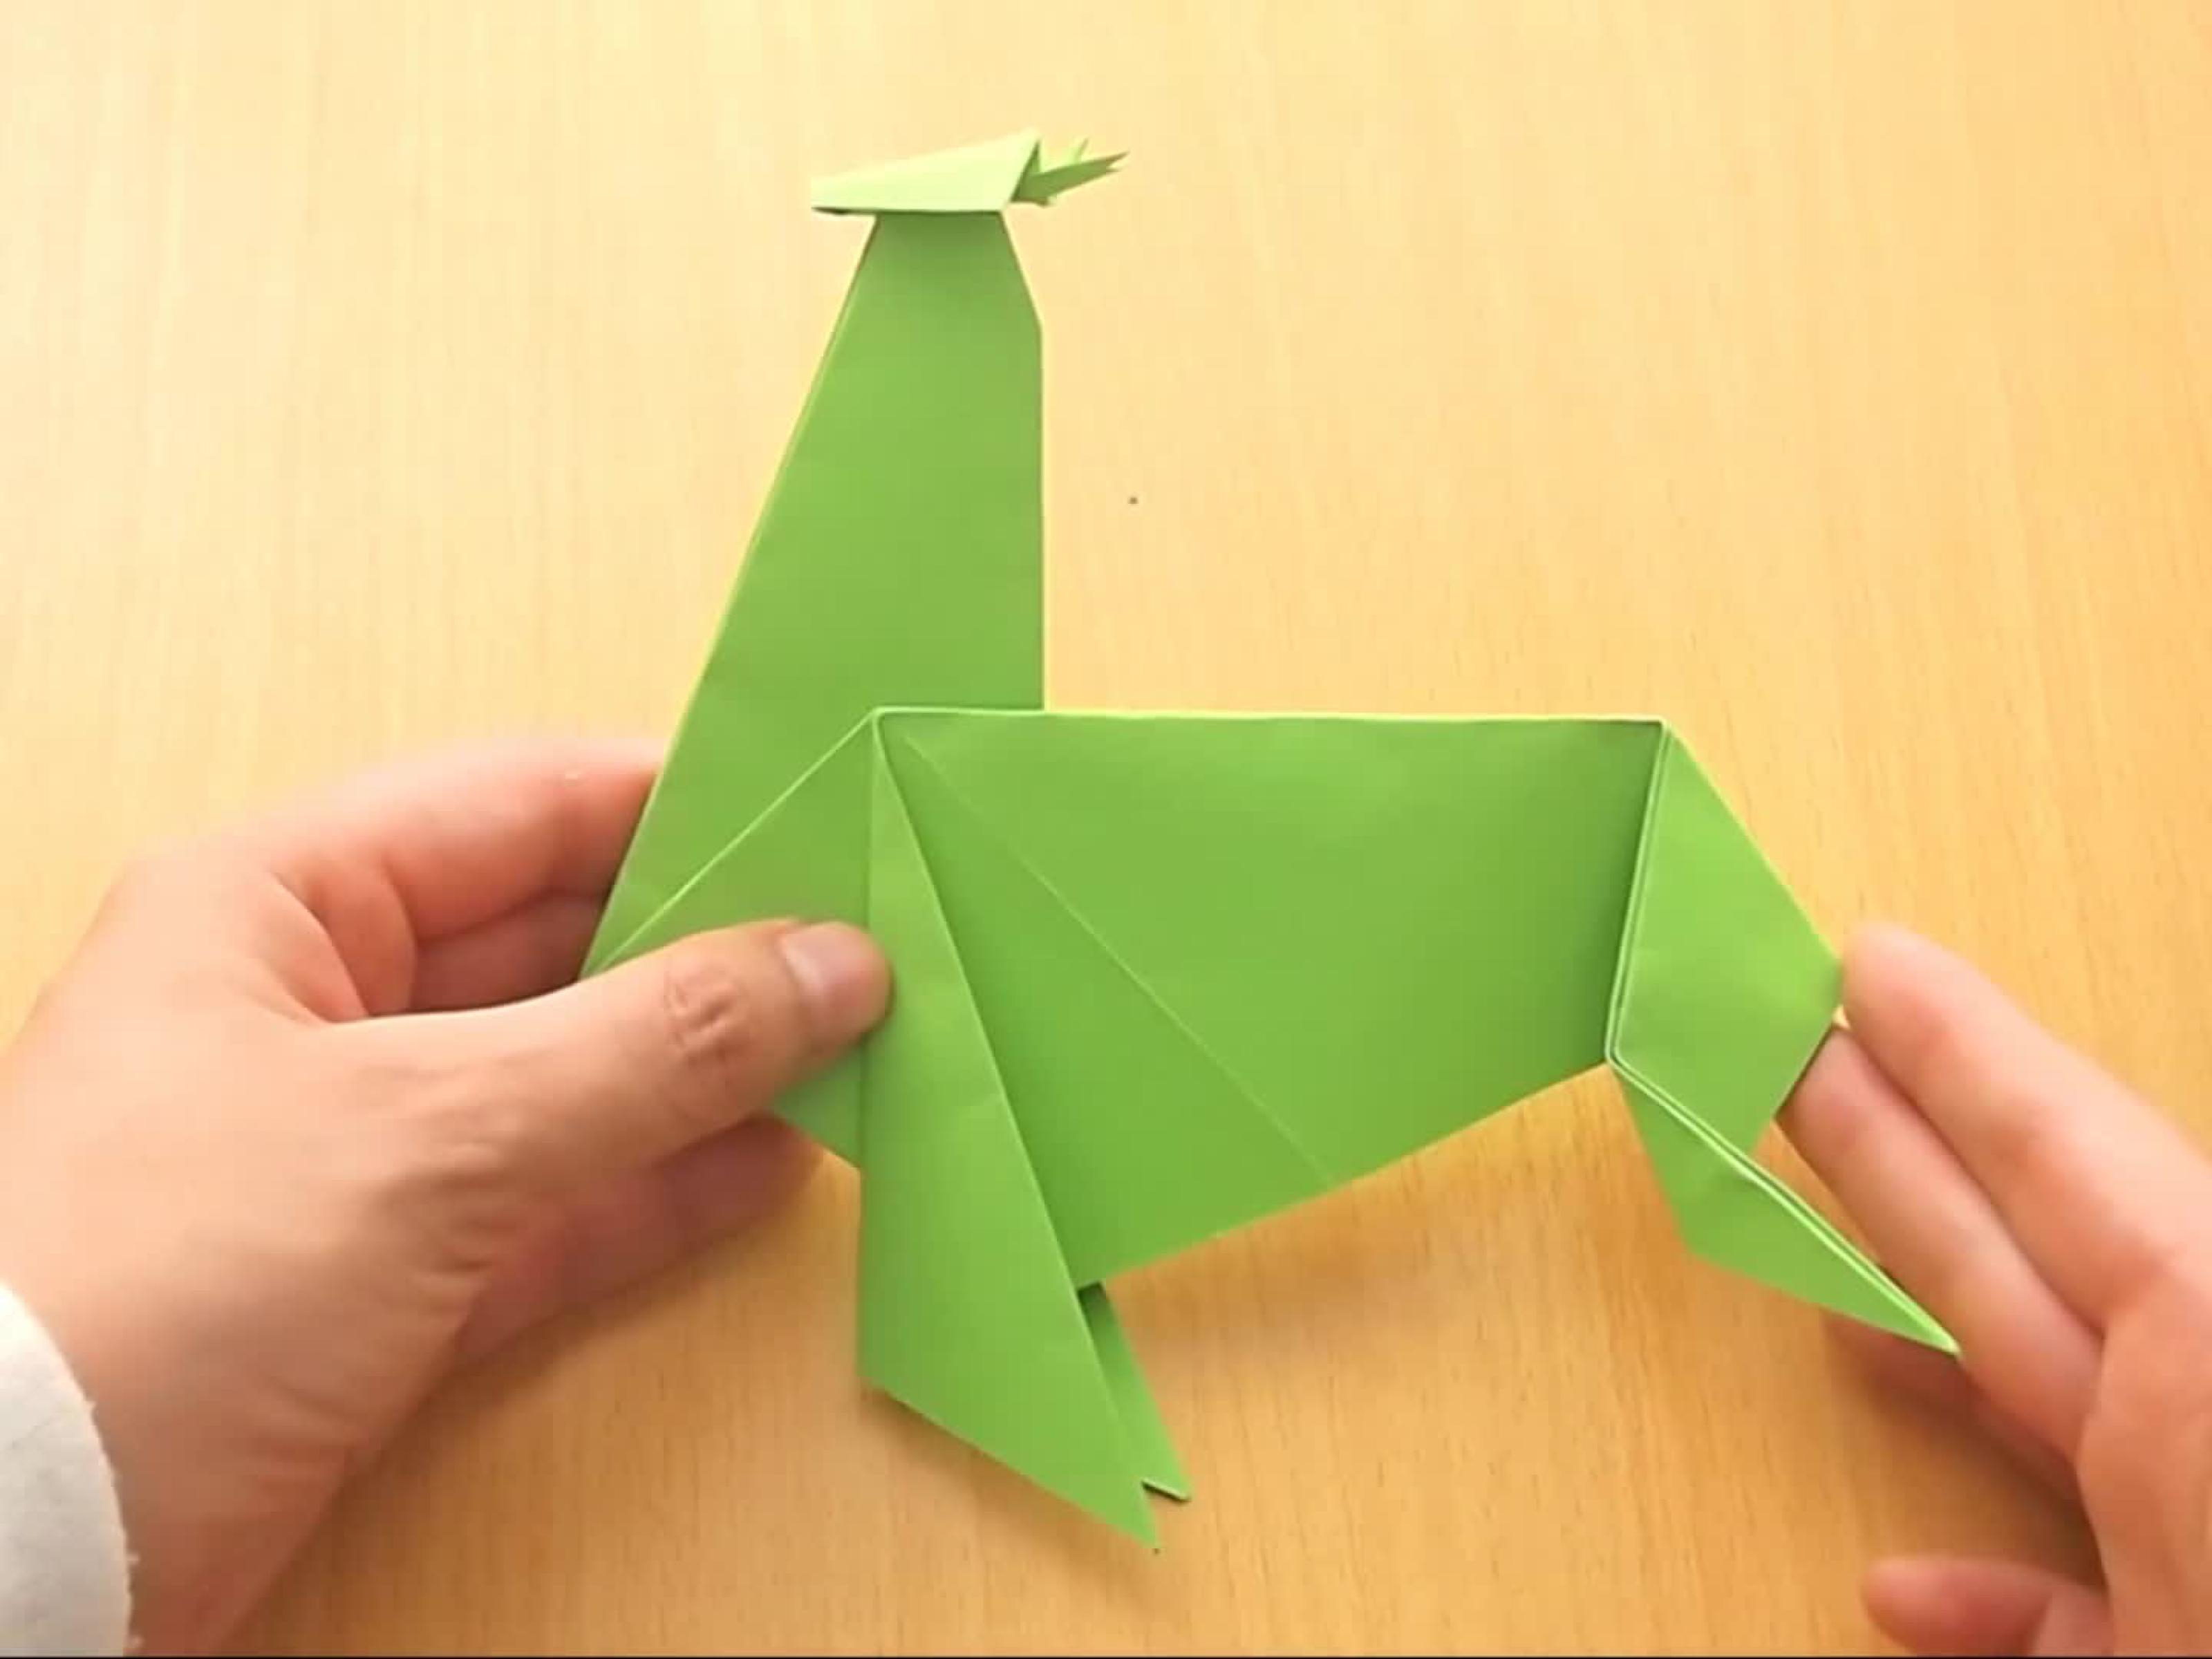 How Do You Make Origami How To Make An Origami Reindeer With Pictures Wikihow